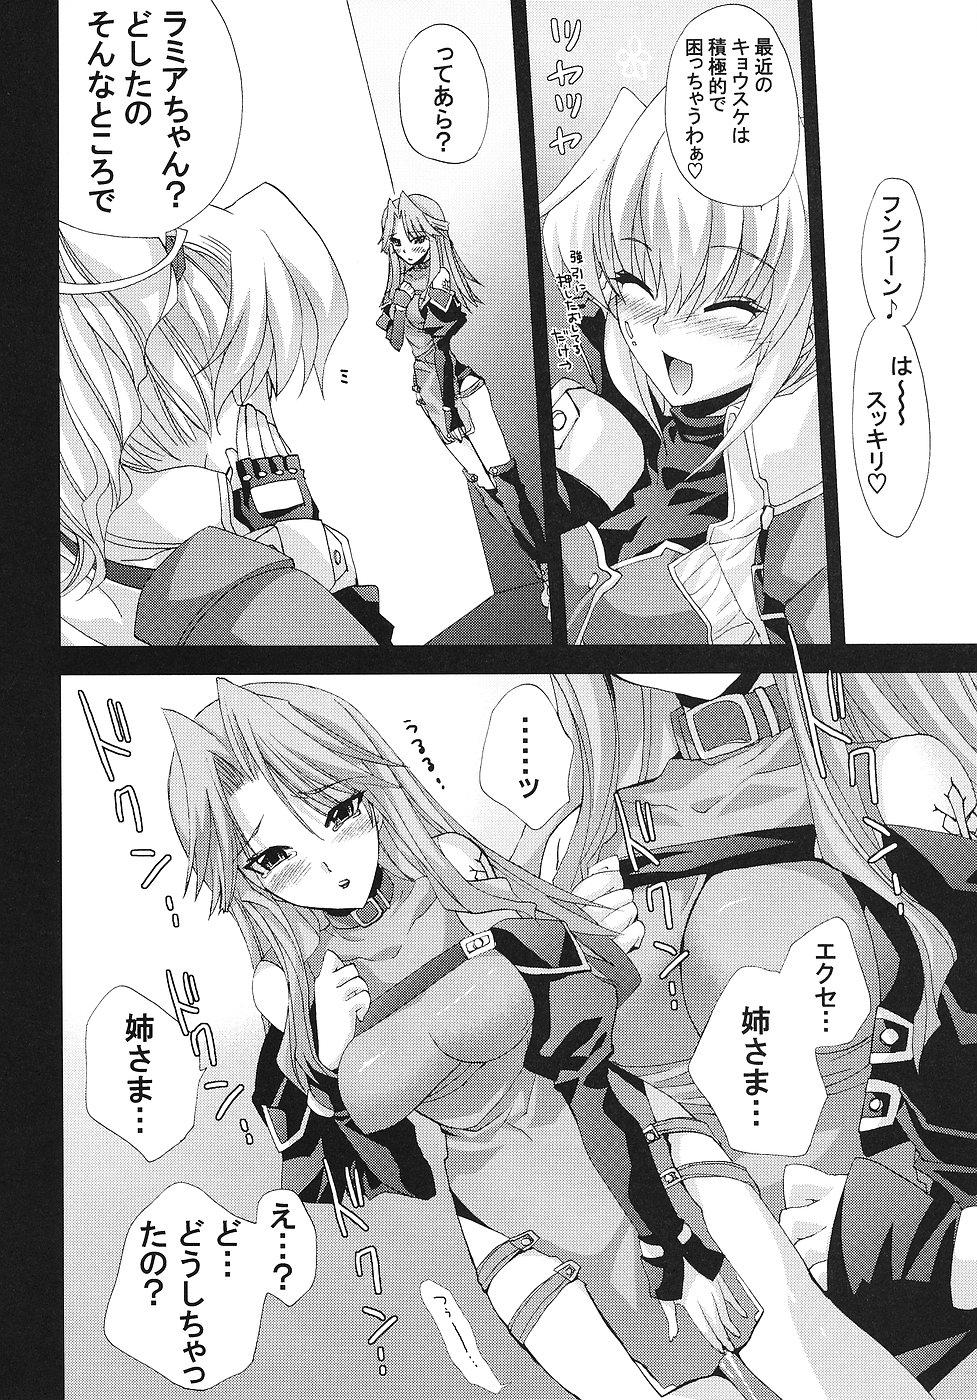 Young Night and day - Super robot wars Seduction Porn - Page 5